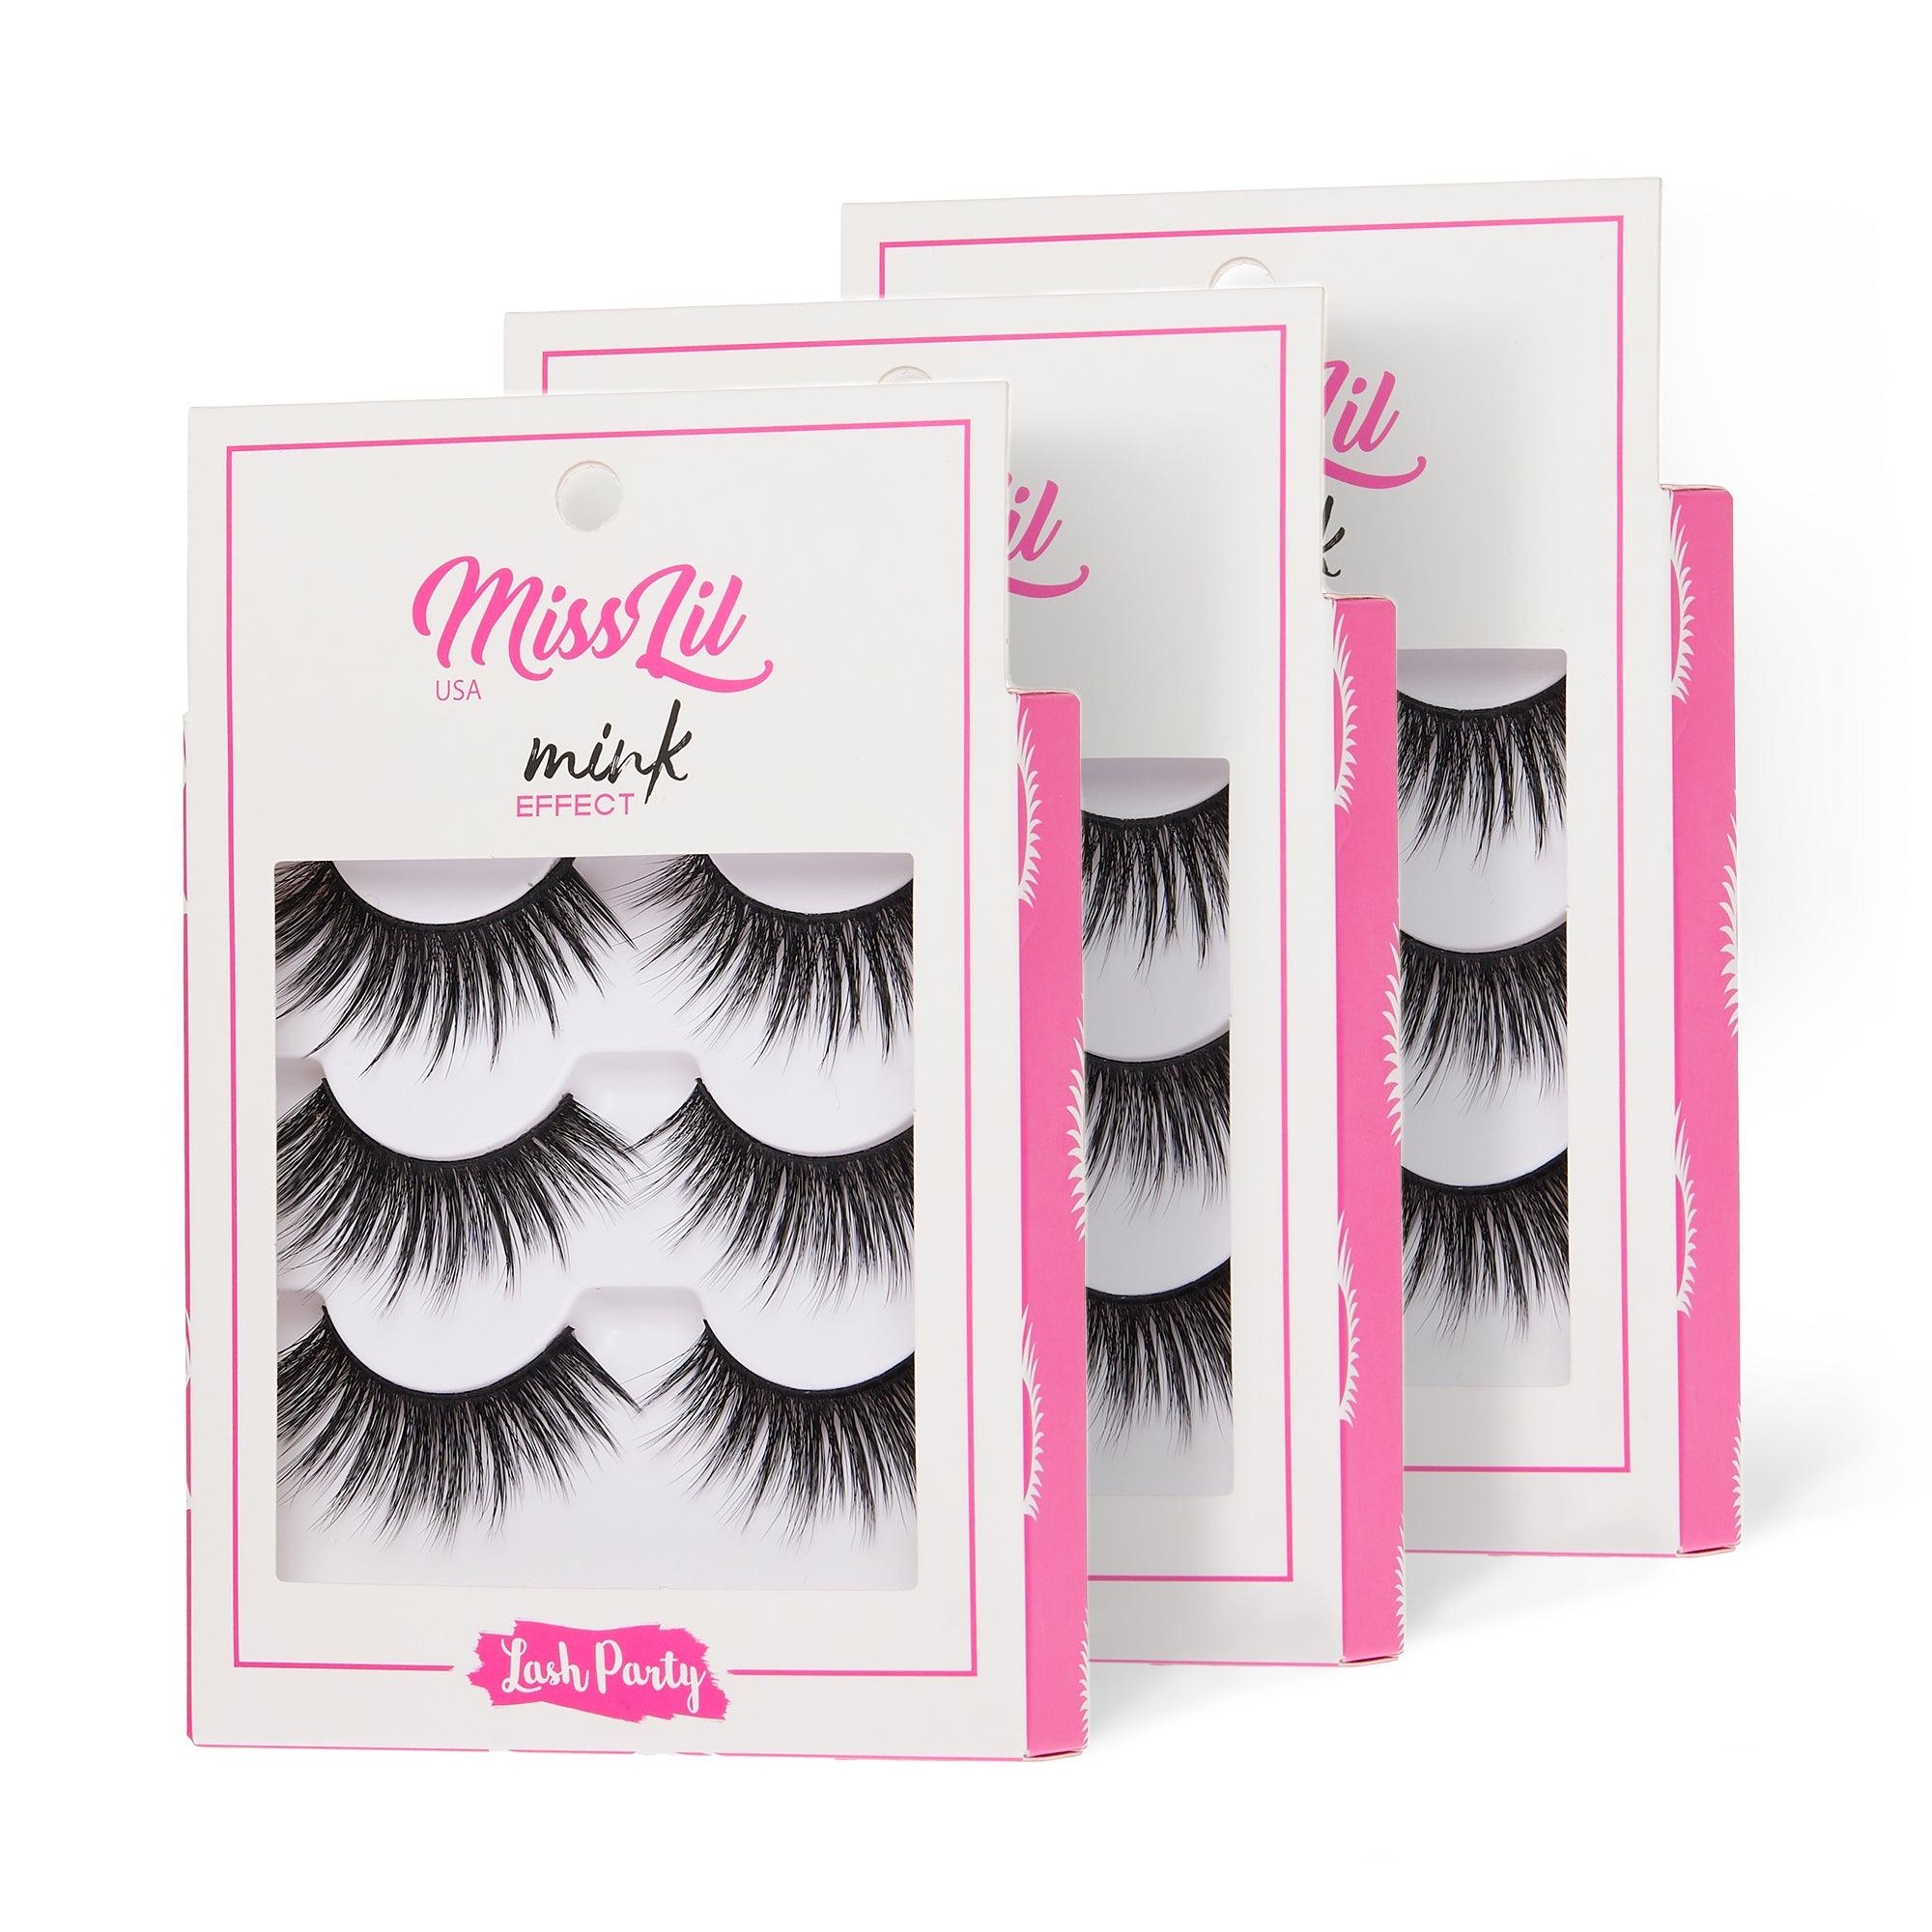 3-Pair Faux Mink Effect Eyelashes - Lash Party Collection #28 - Pack of 3 - Miss Lil USA